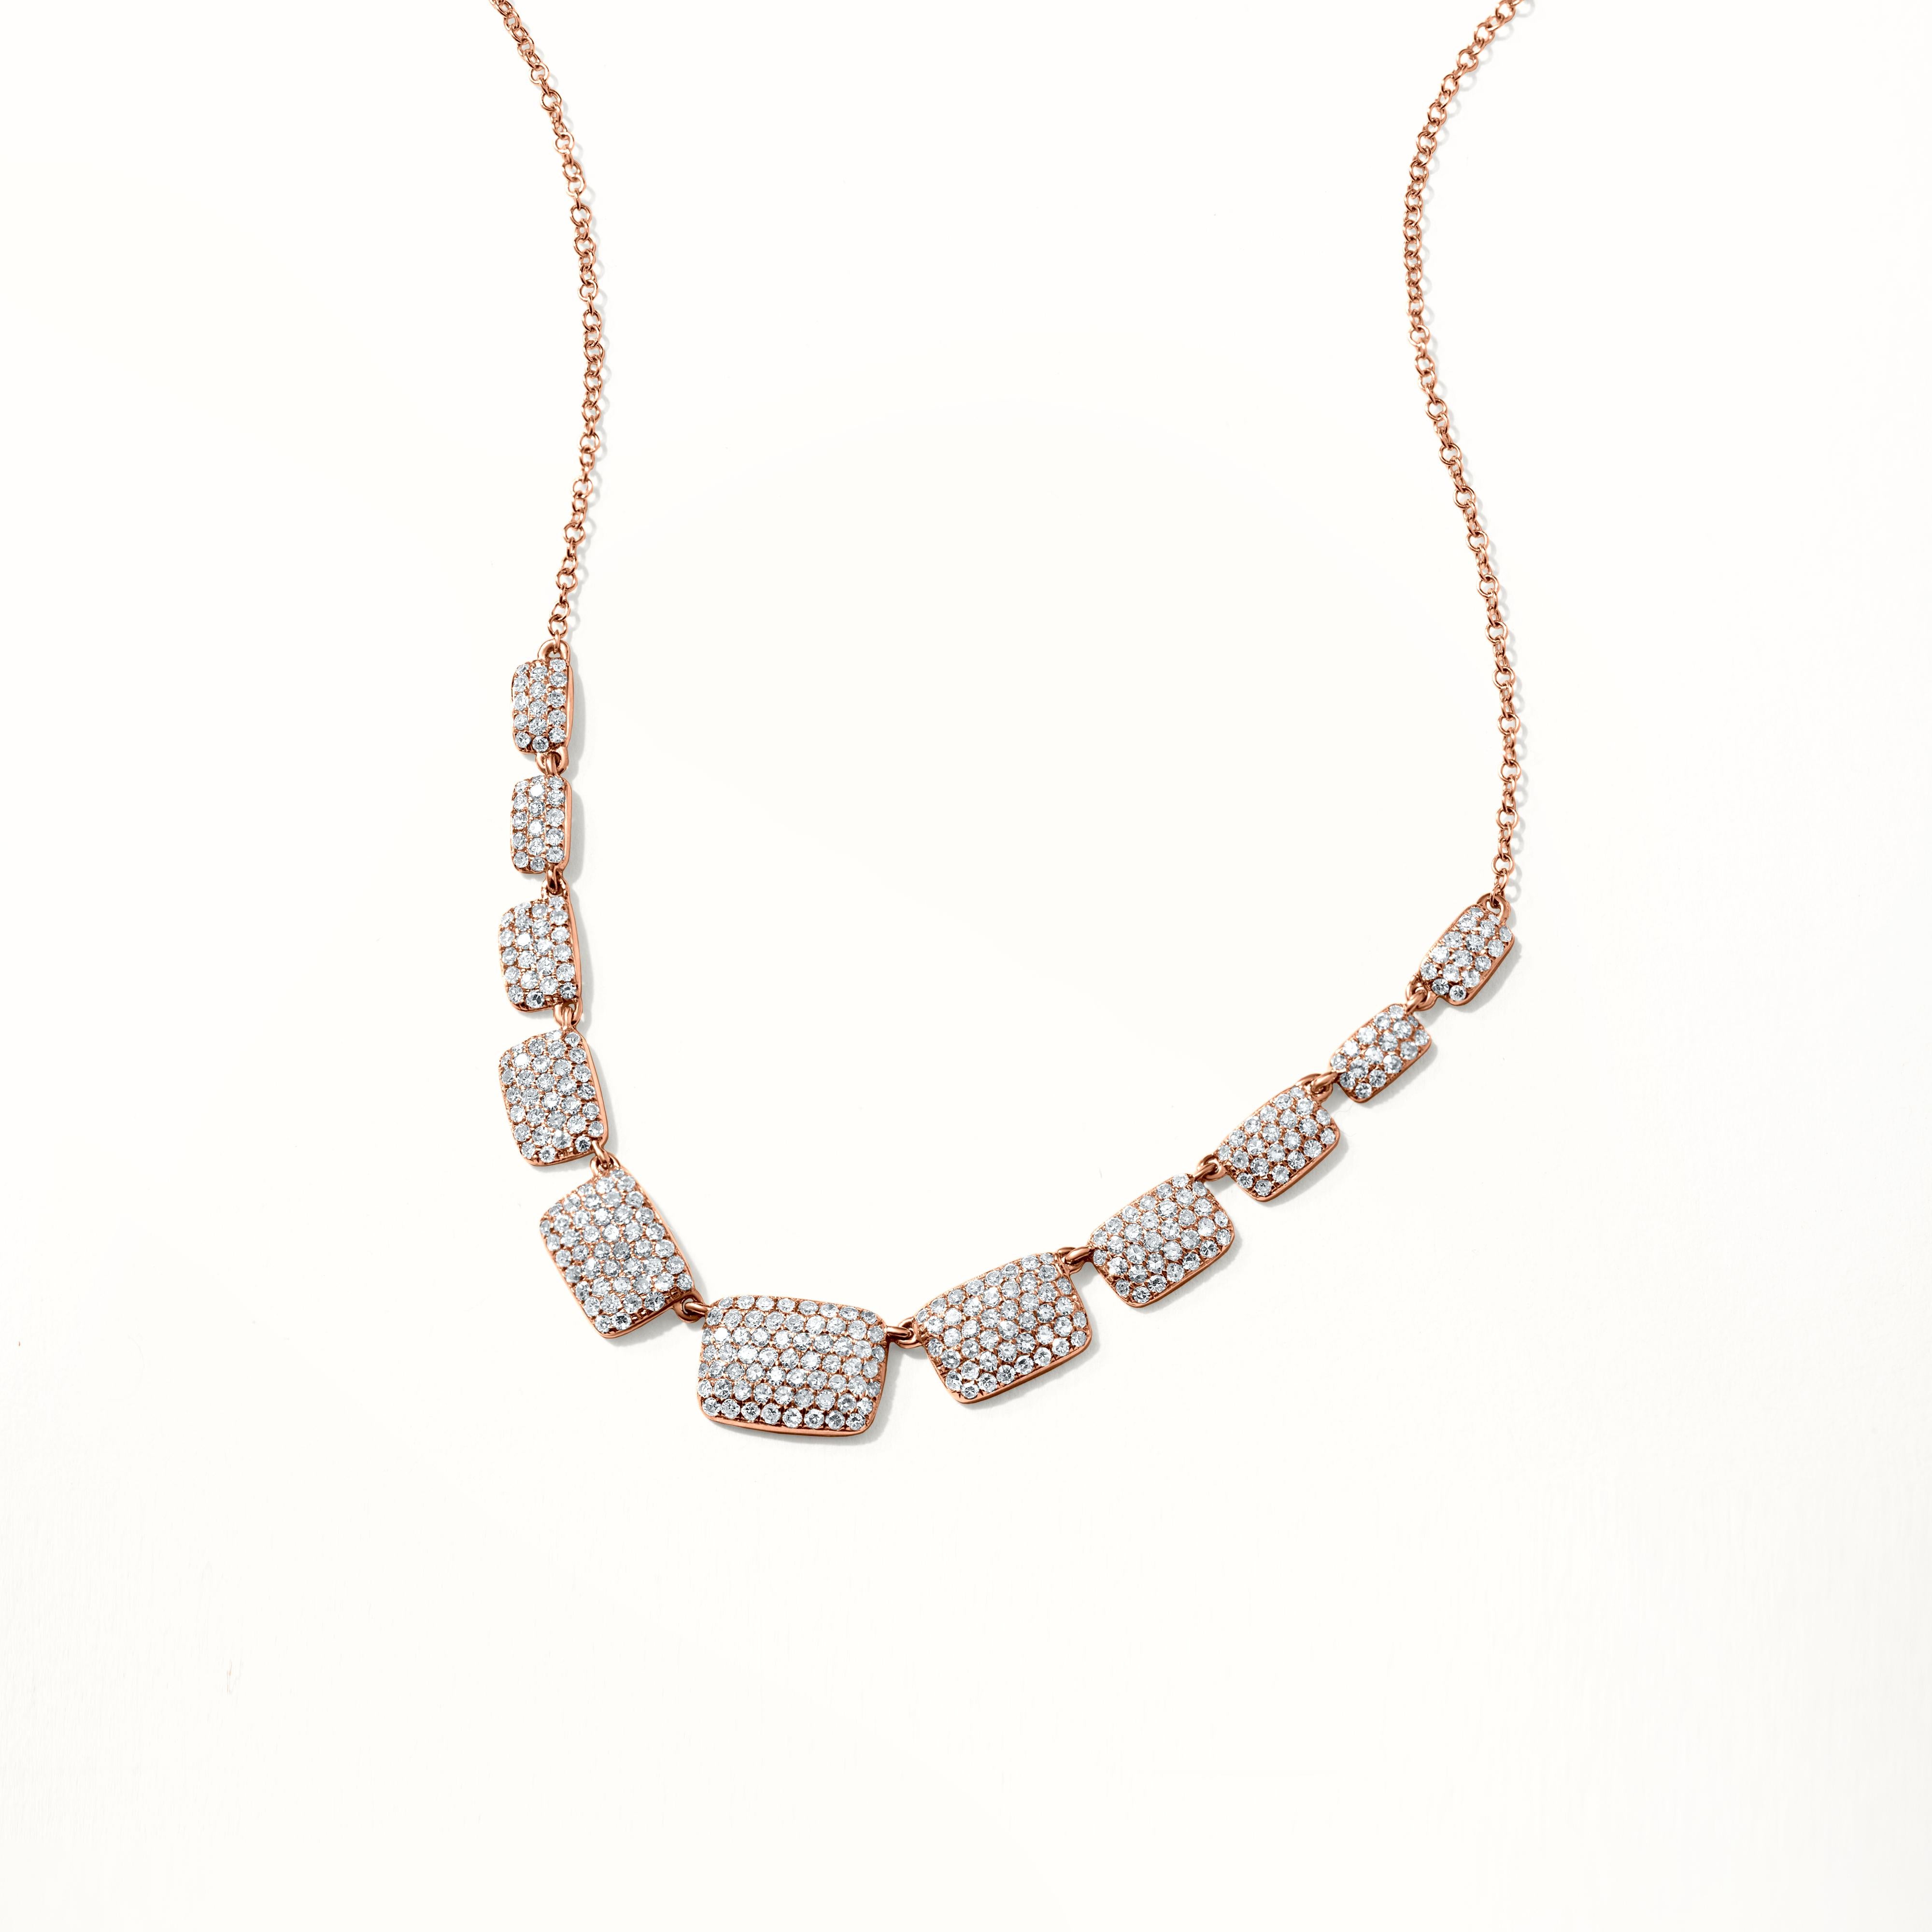 With this gorgeous piece, created by Luxle in 14K rose gold, embrace your neckline. The entire necklace showcases 325 round diamonds. Minimal, stylish, which looks modern, appears effortless perfect for your cocktail evenings. The diamonds have a